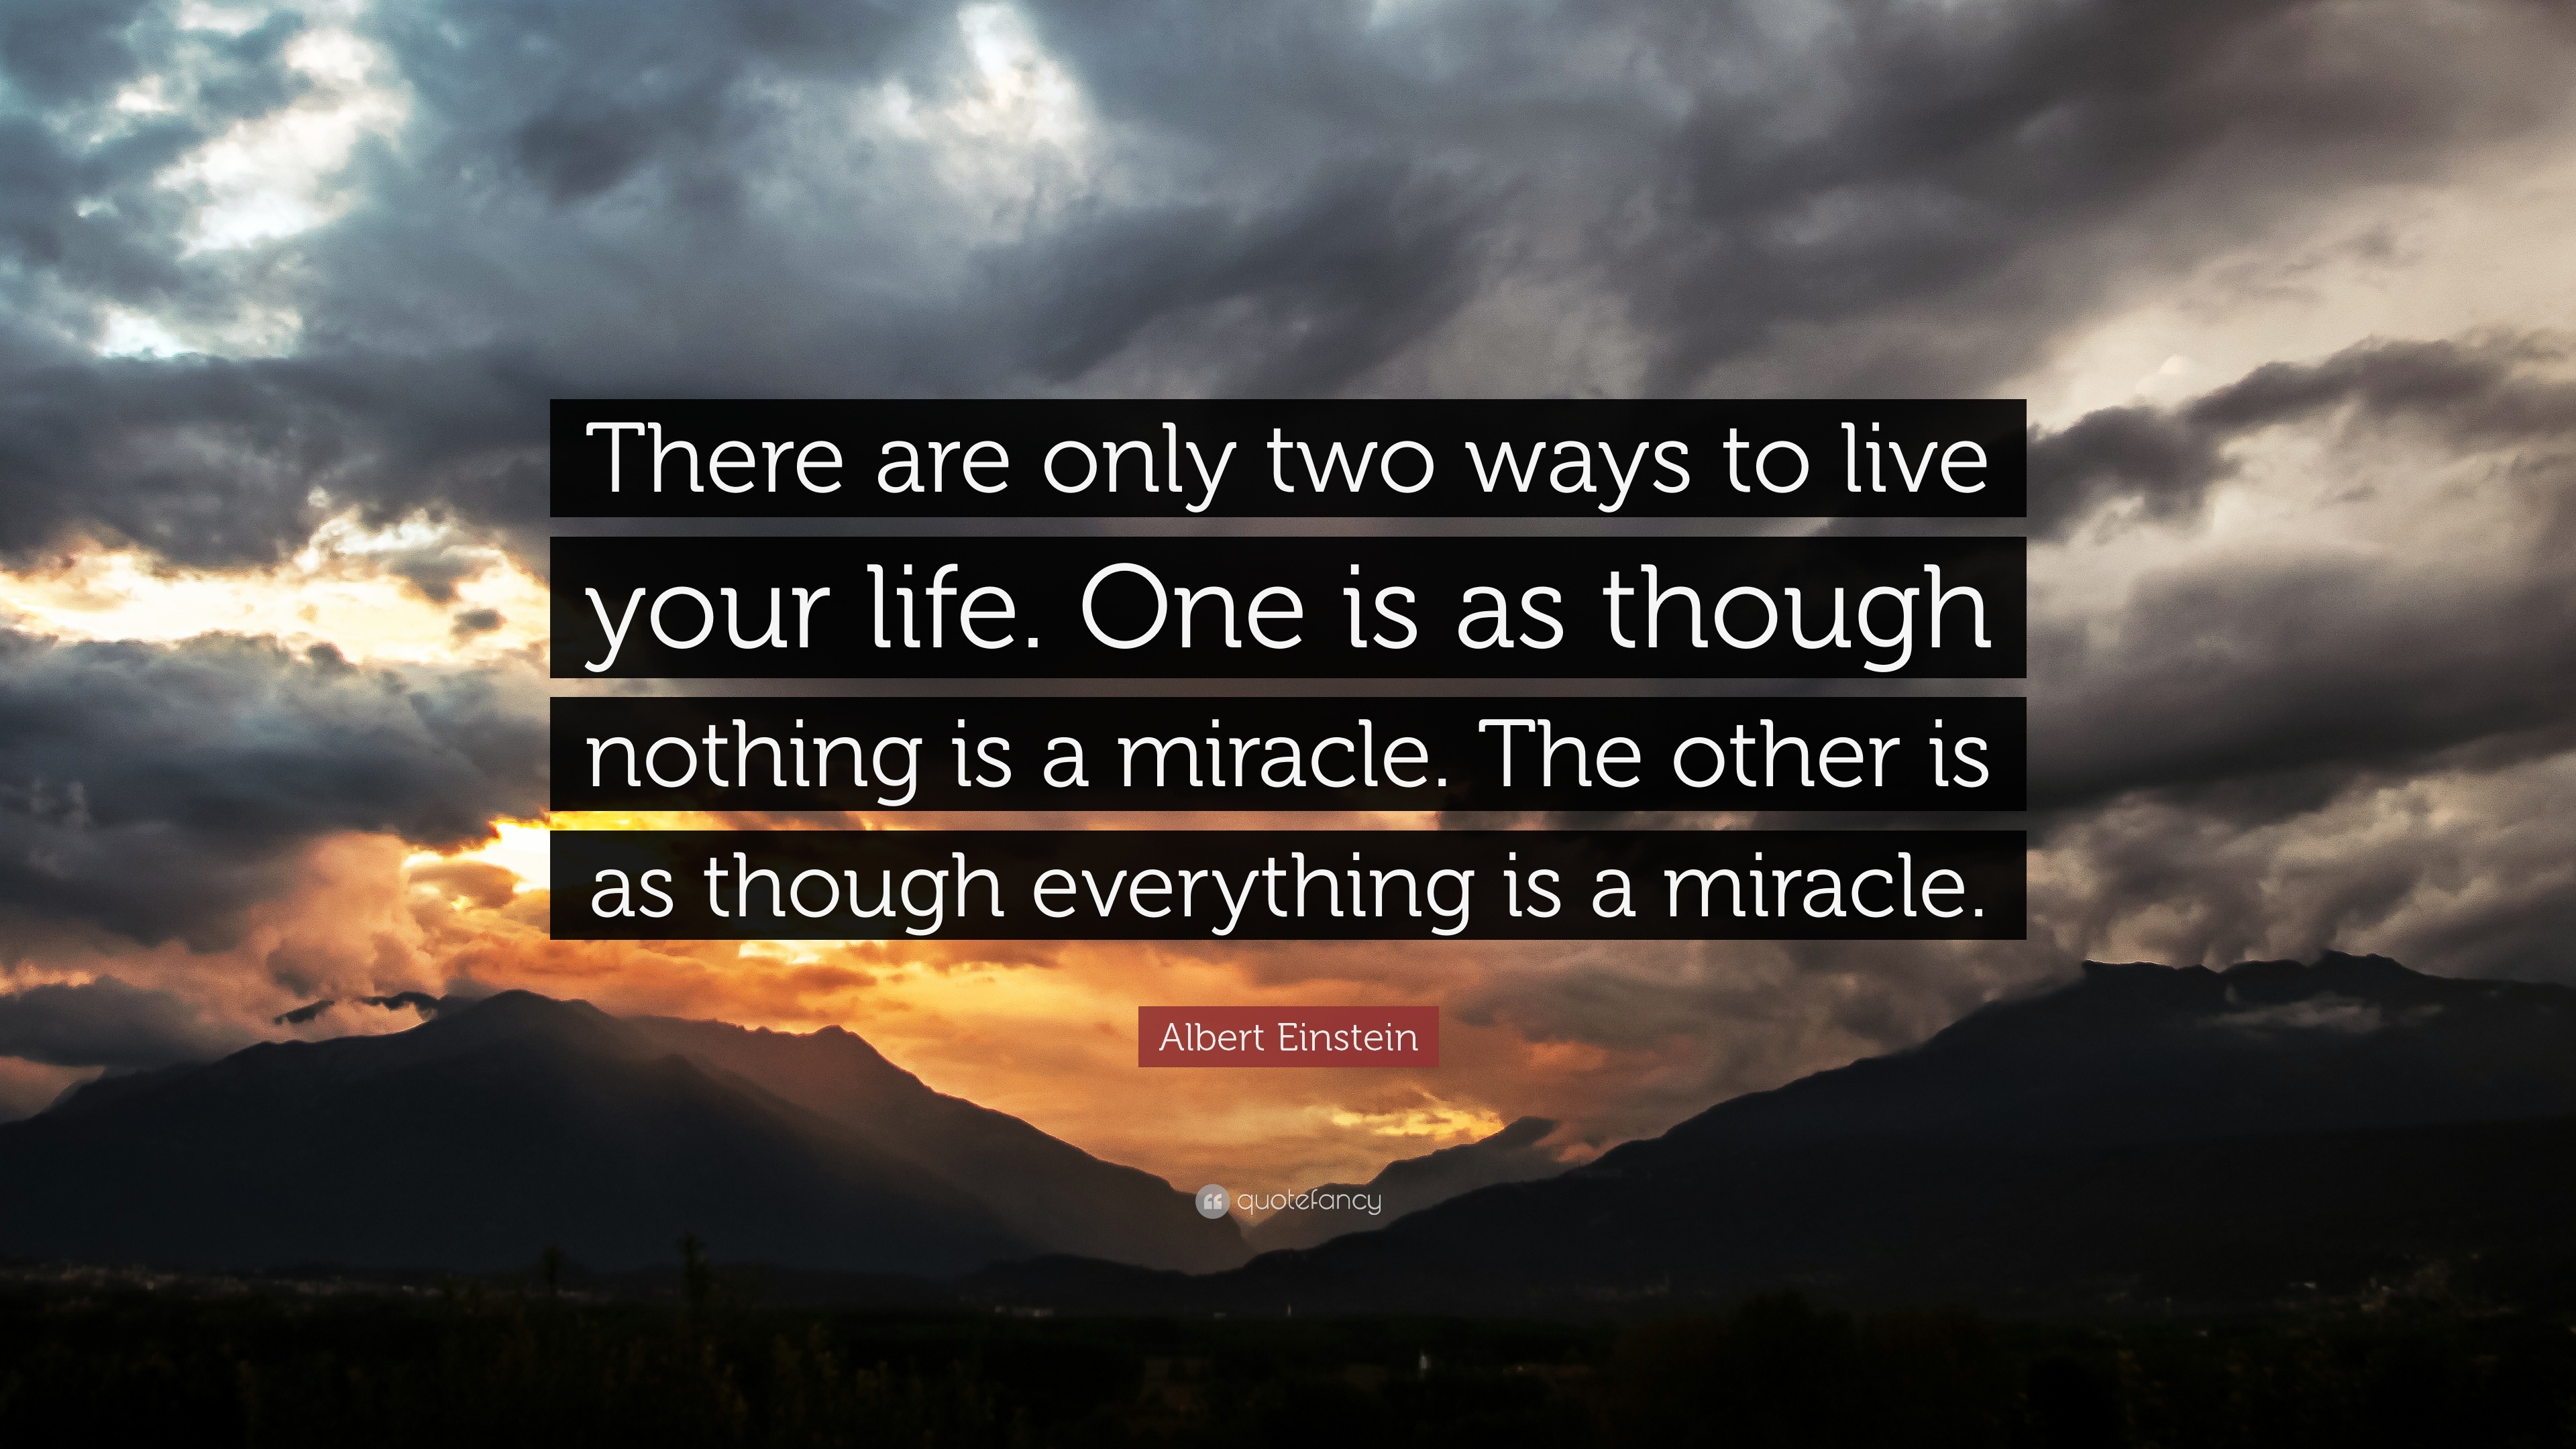 Albert Einstein Quote “There are only two ways to live your life e